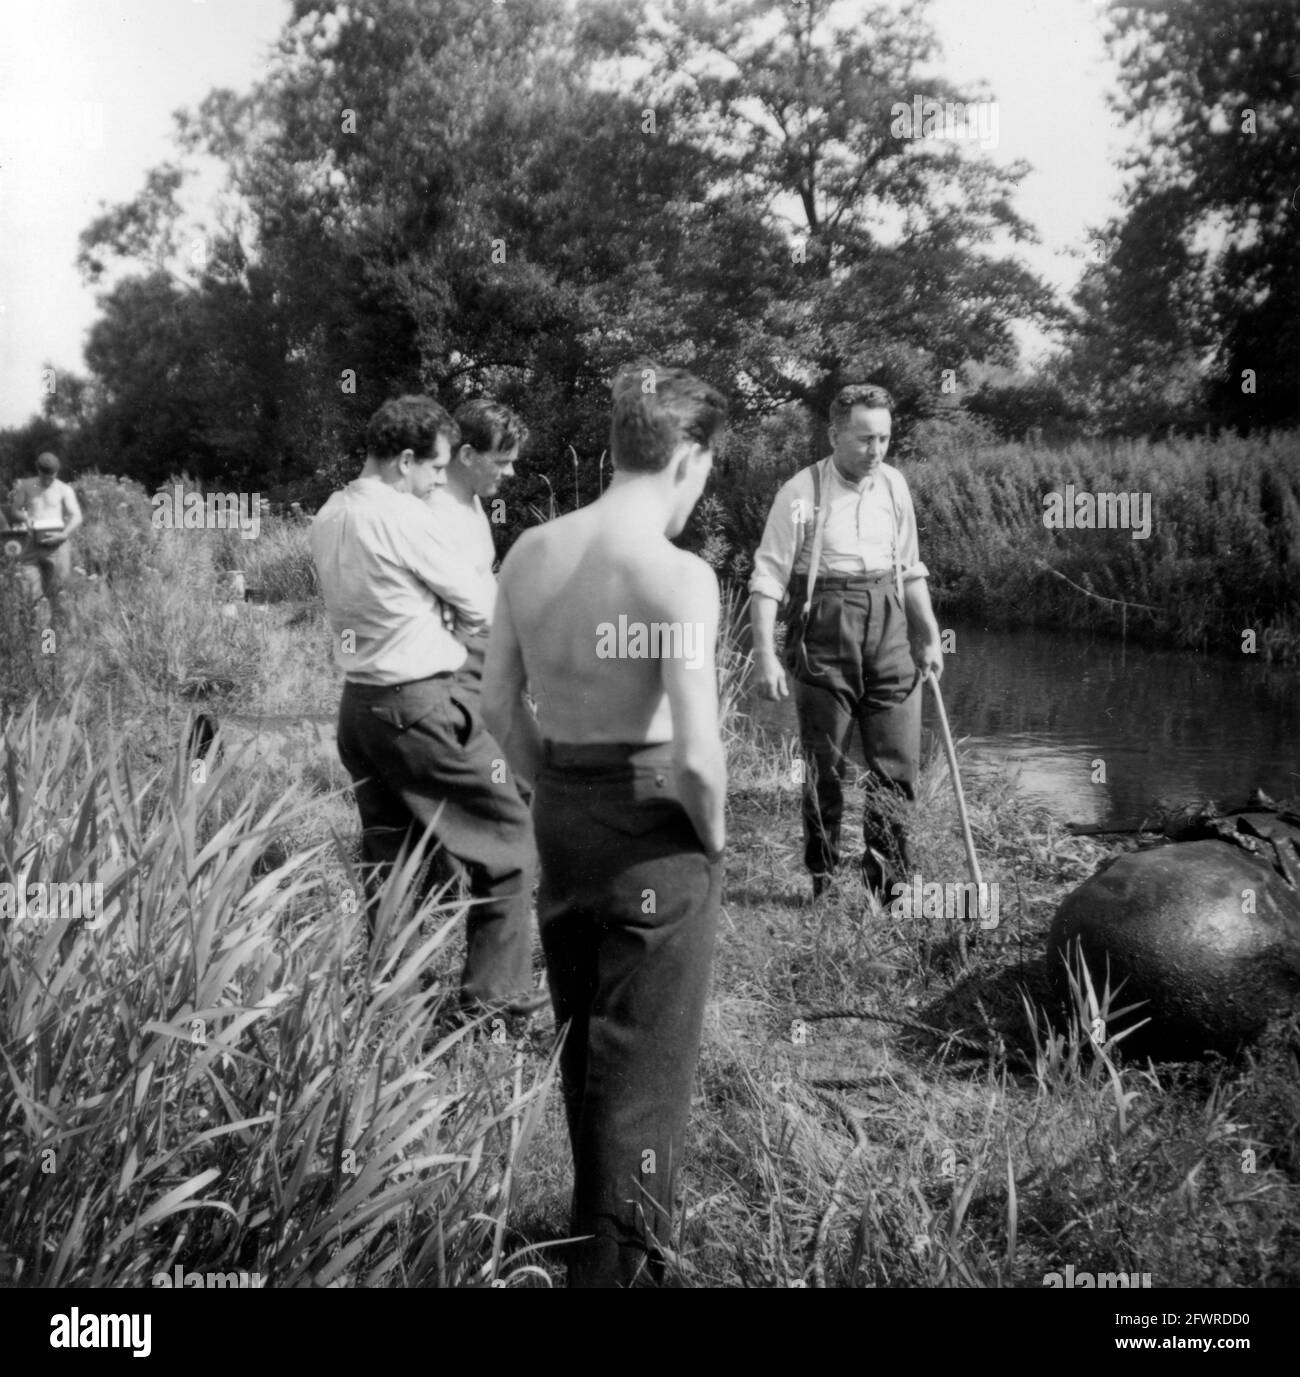 Members of the Royal Air Force bomb disposal unit dealing with Second World War ordnance, having extracted it from a river. 1950s/60s Stock Photo